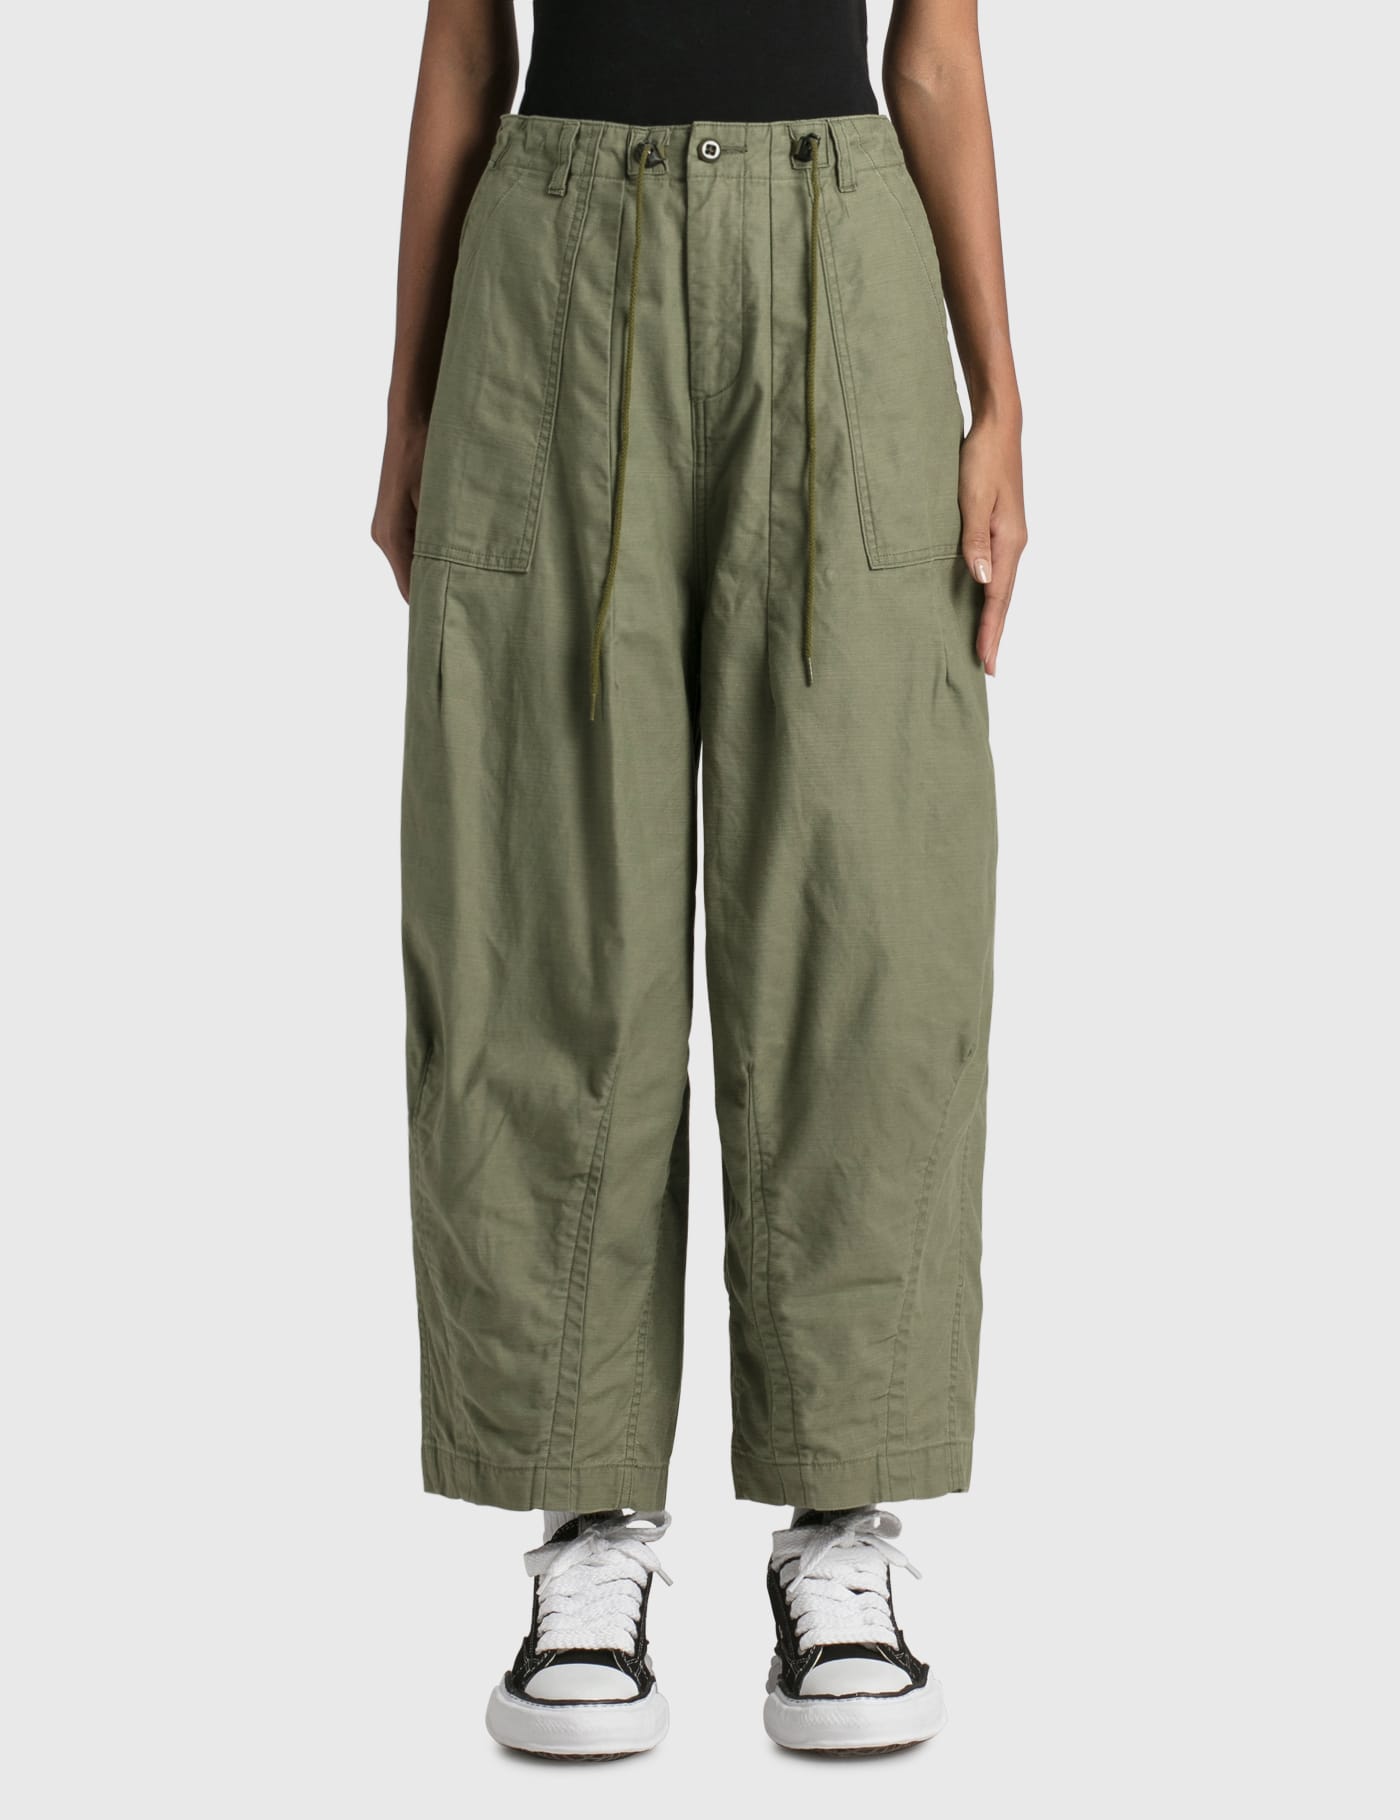 Needles - Fatigue Pants | HBX - Globally Curated Fashion and